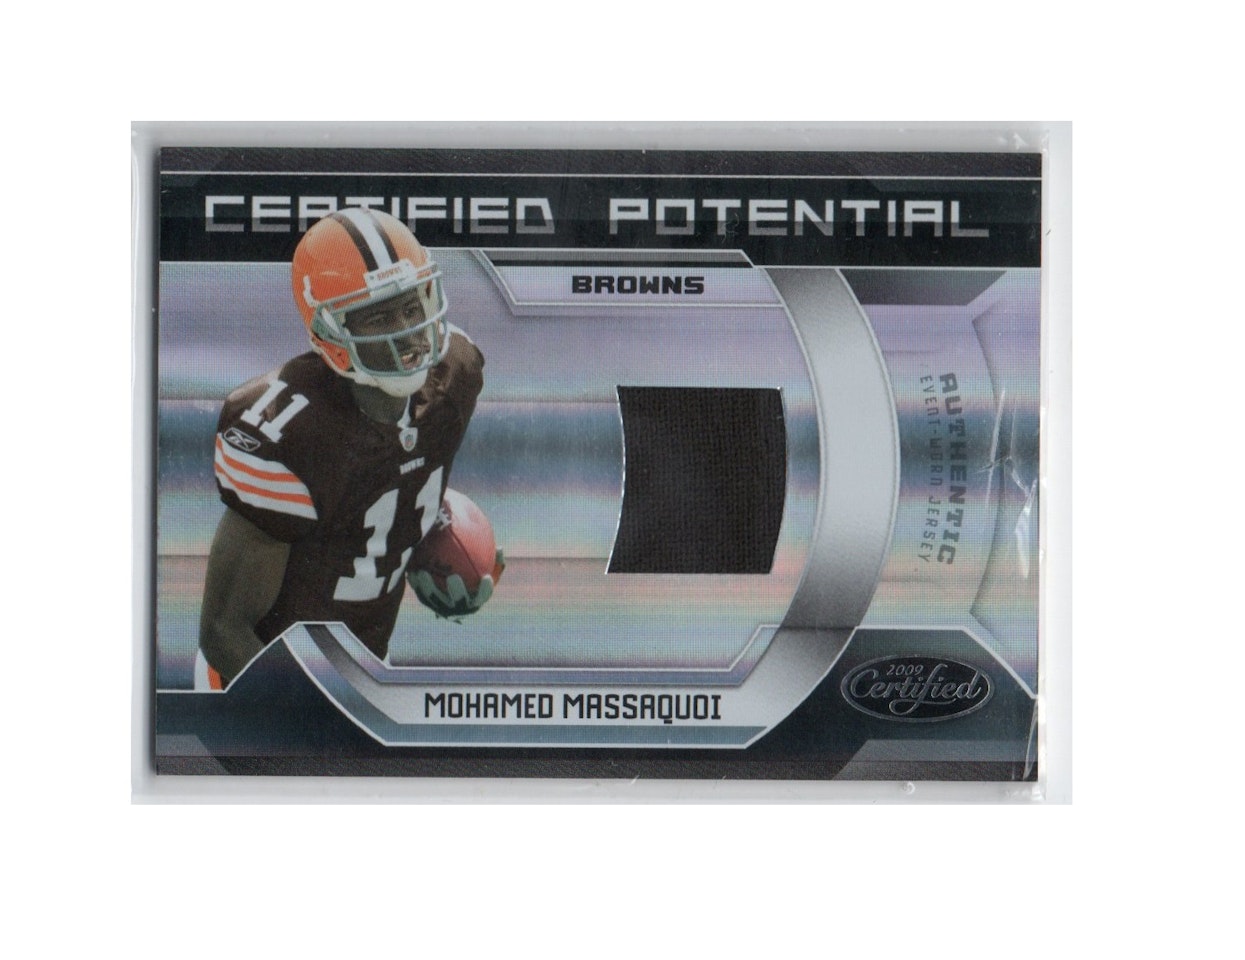 2009 Certified Certified Potential Materials #20 Mohamed Massaquoi (30-X253-NFLBROWNS)